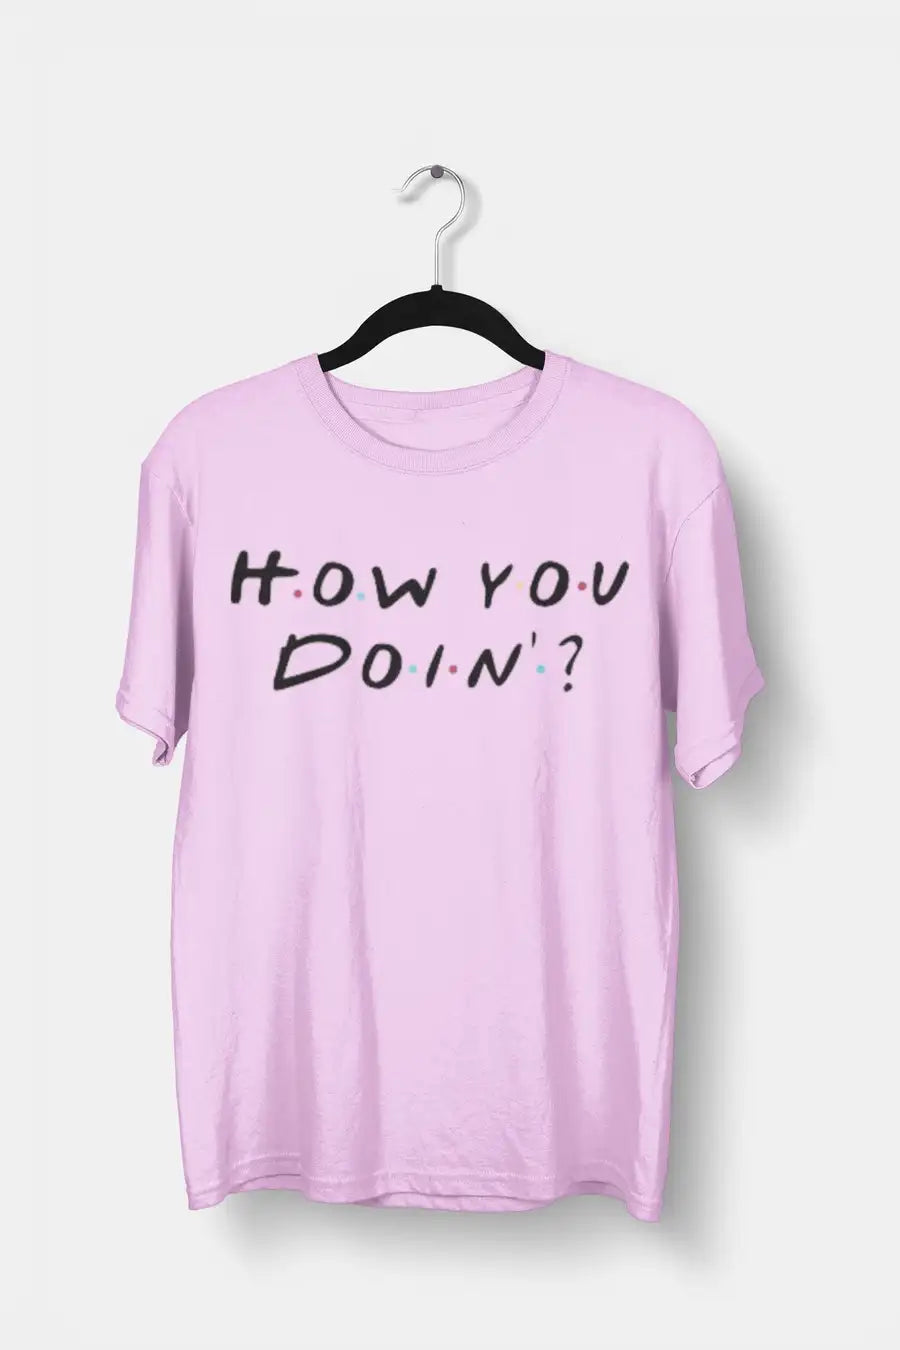 "How You Doin" Iconic T Shirt for Guys | Premium Design | Catch My Drift India - Catch My Drift India Clothing clothing, friends, made in india, multi colour, shirt, t shirt, trending, tshirt